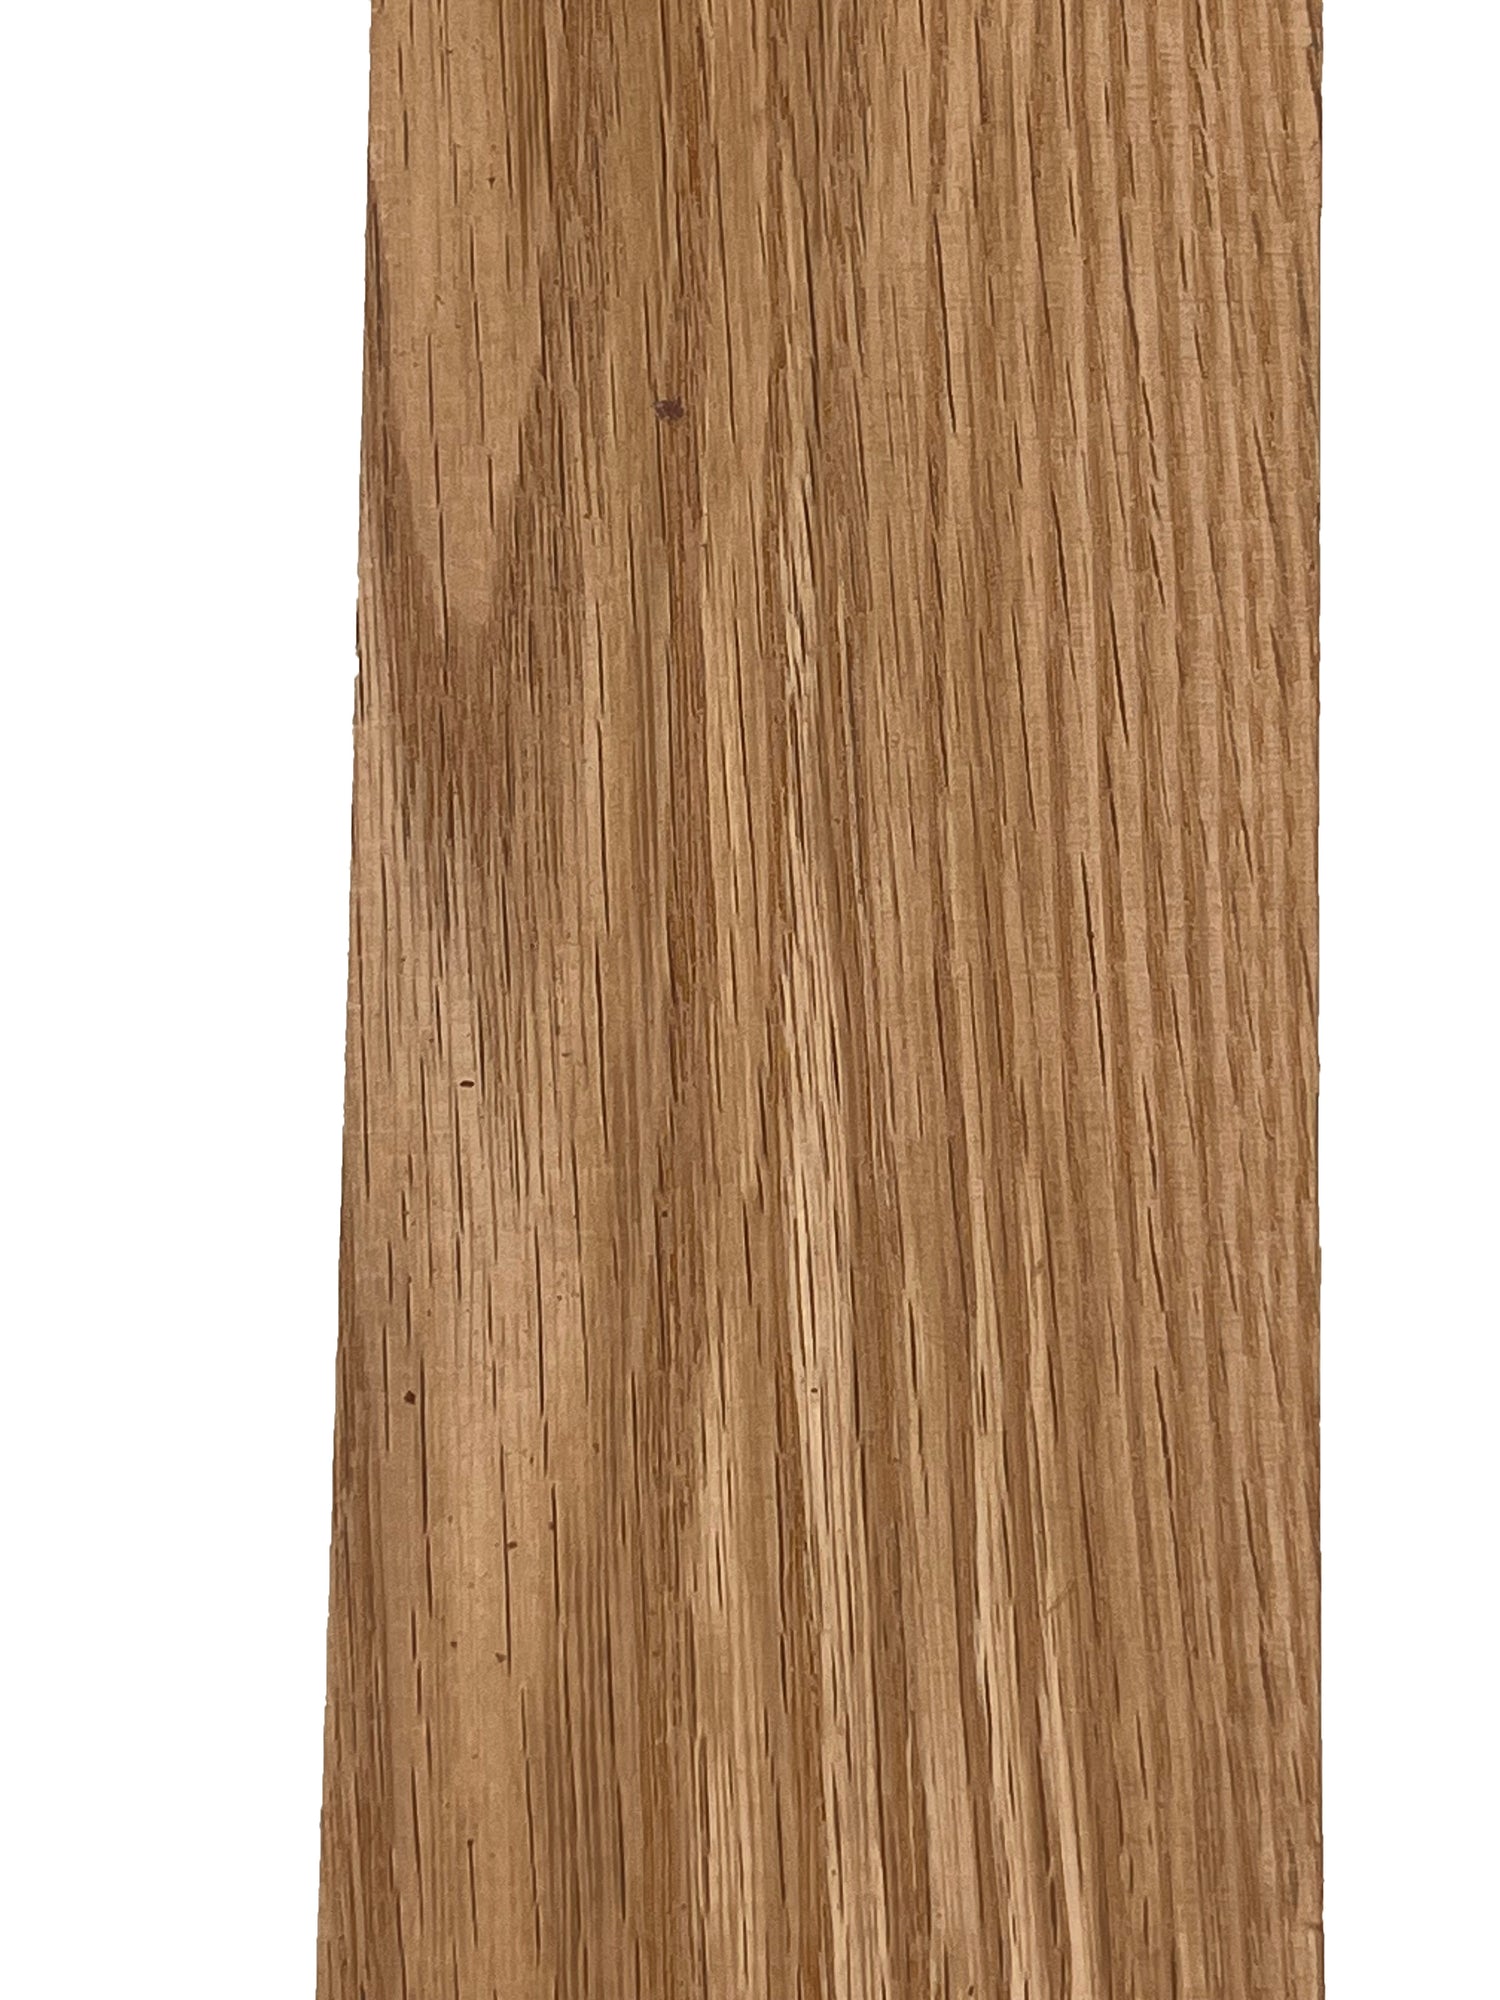 Red Oak Lumber Board - 3/4&quot; x 4&quot; (2 Pieces) - Exotic Wood Zone - Buy online Across USA 